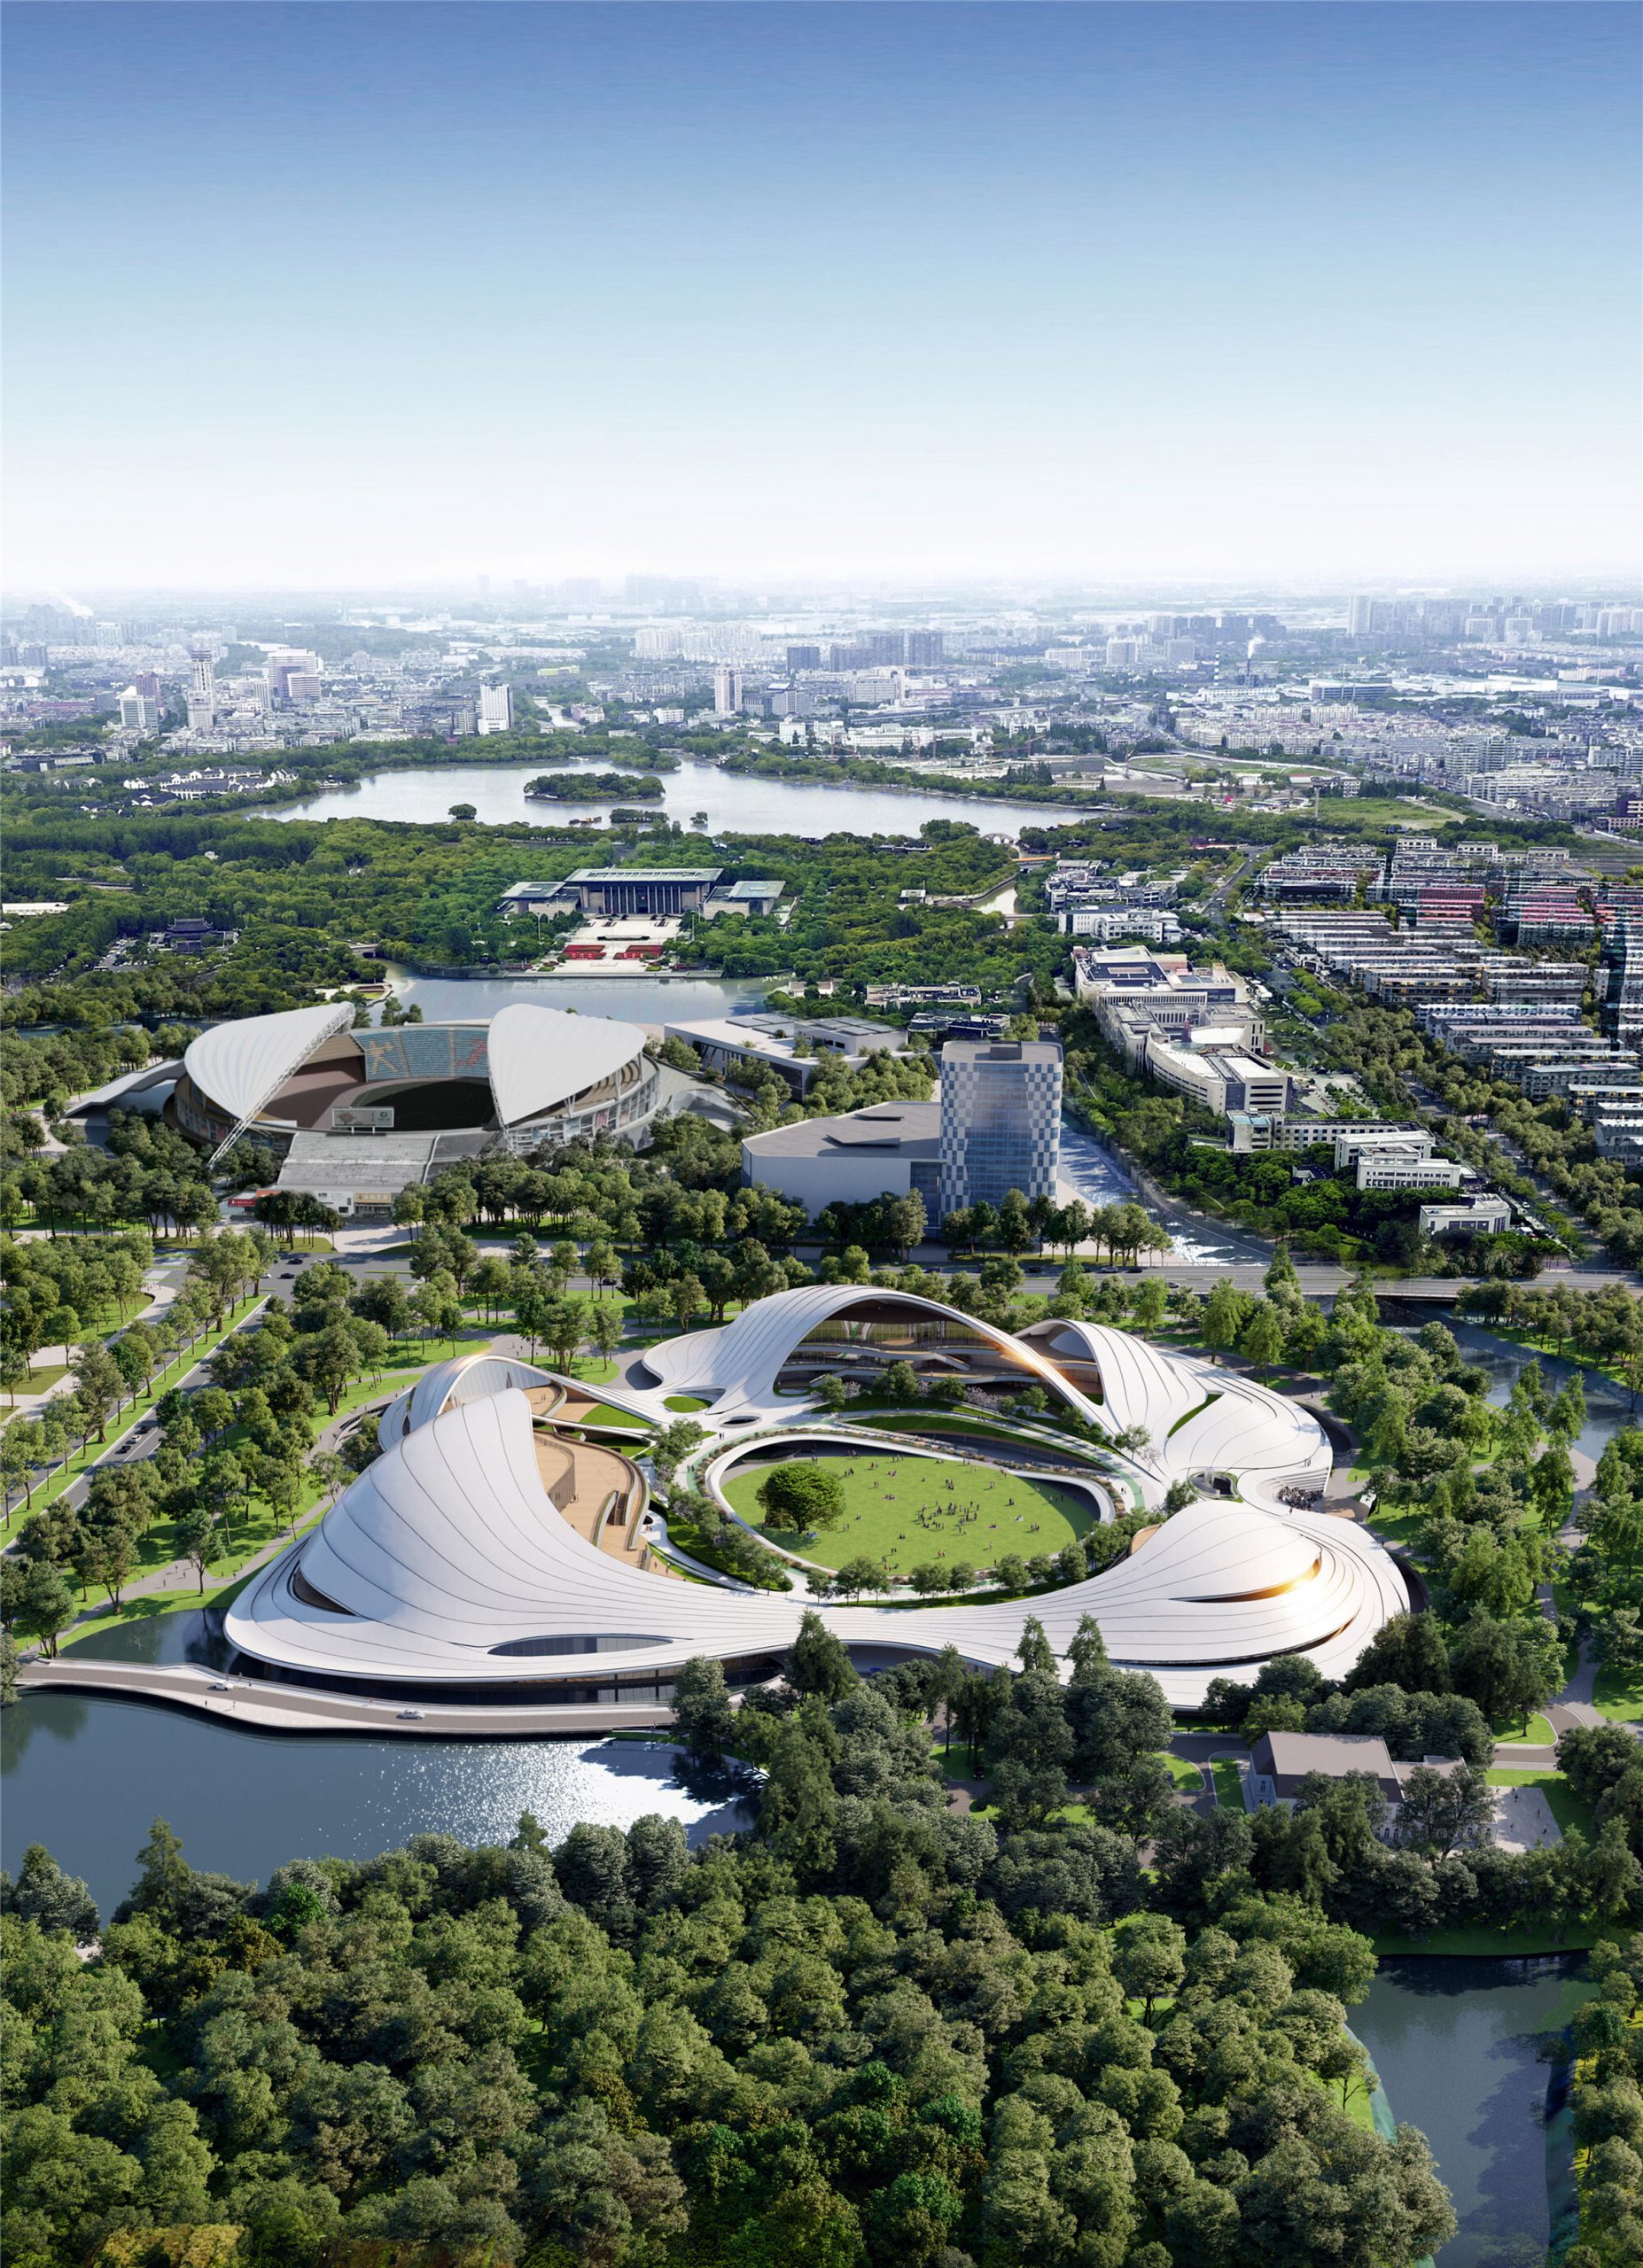 The Jiaxing Civic Centre designed by MAD